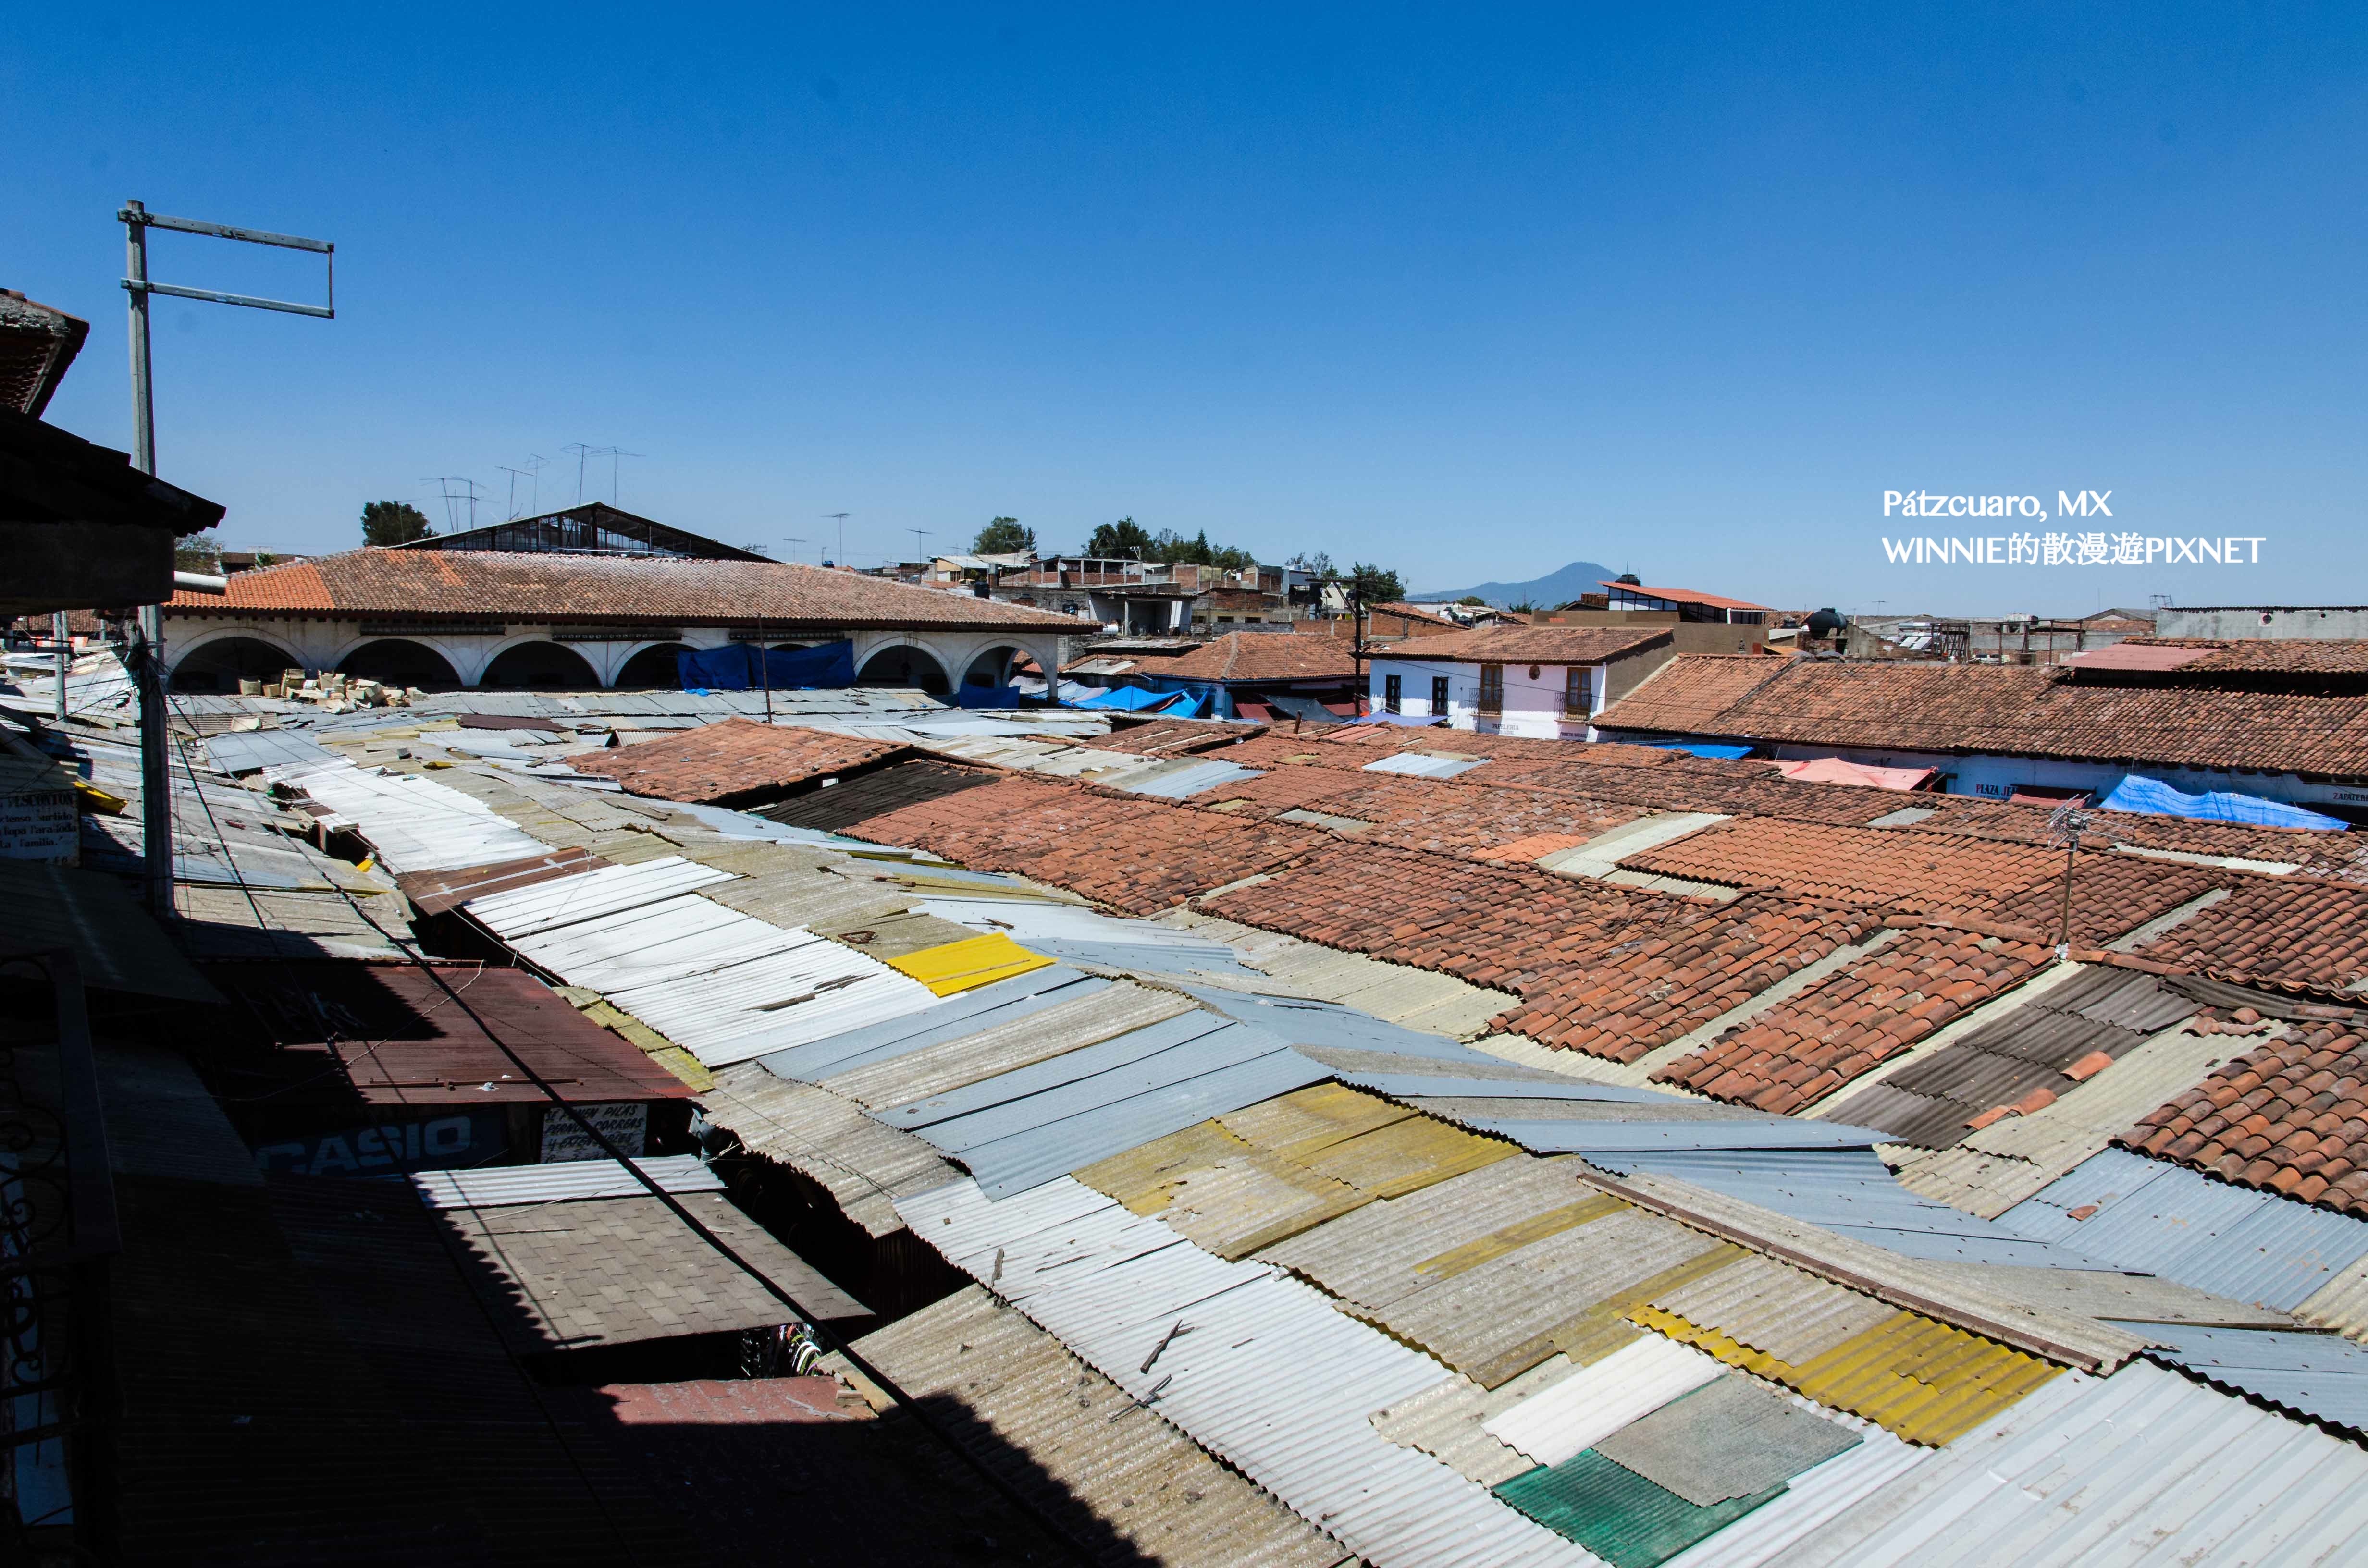 Our hotel roof offered a view of the entire local market